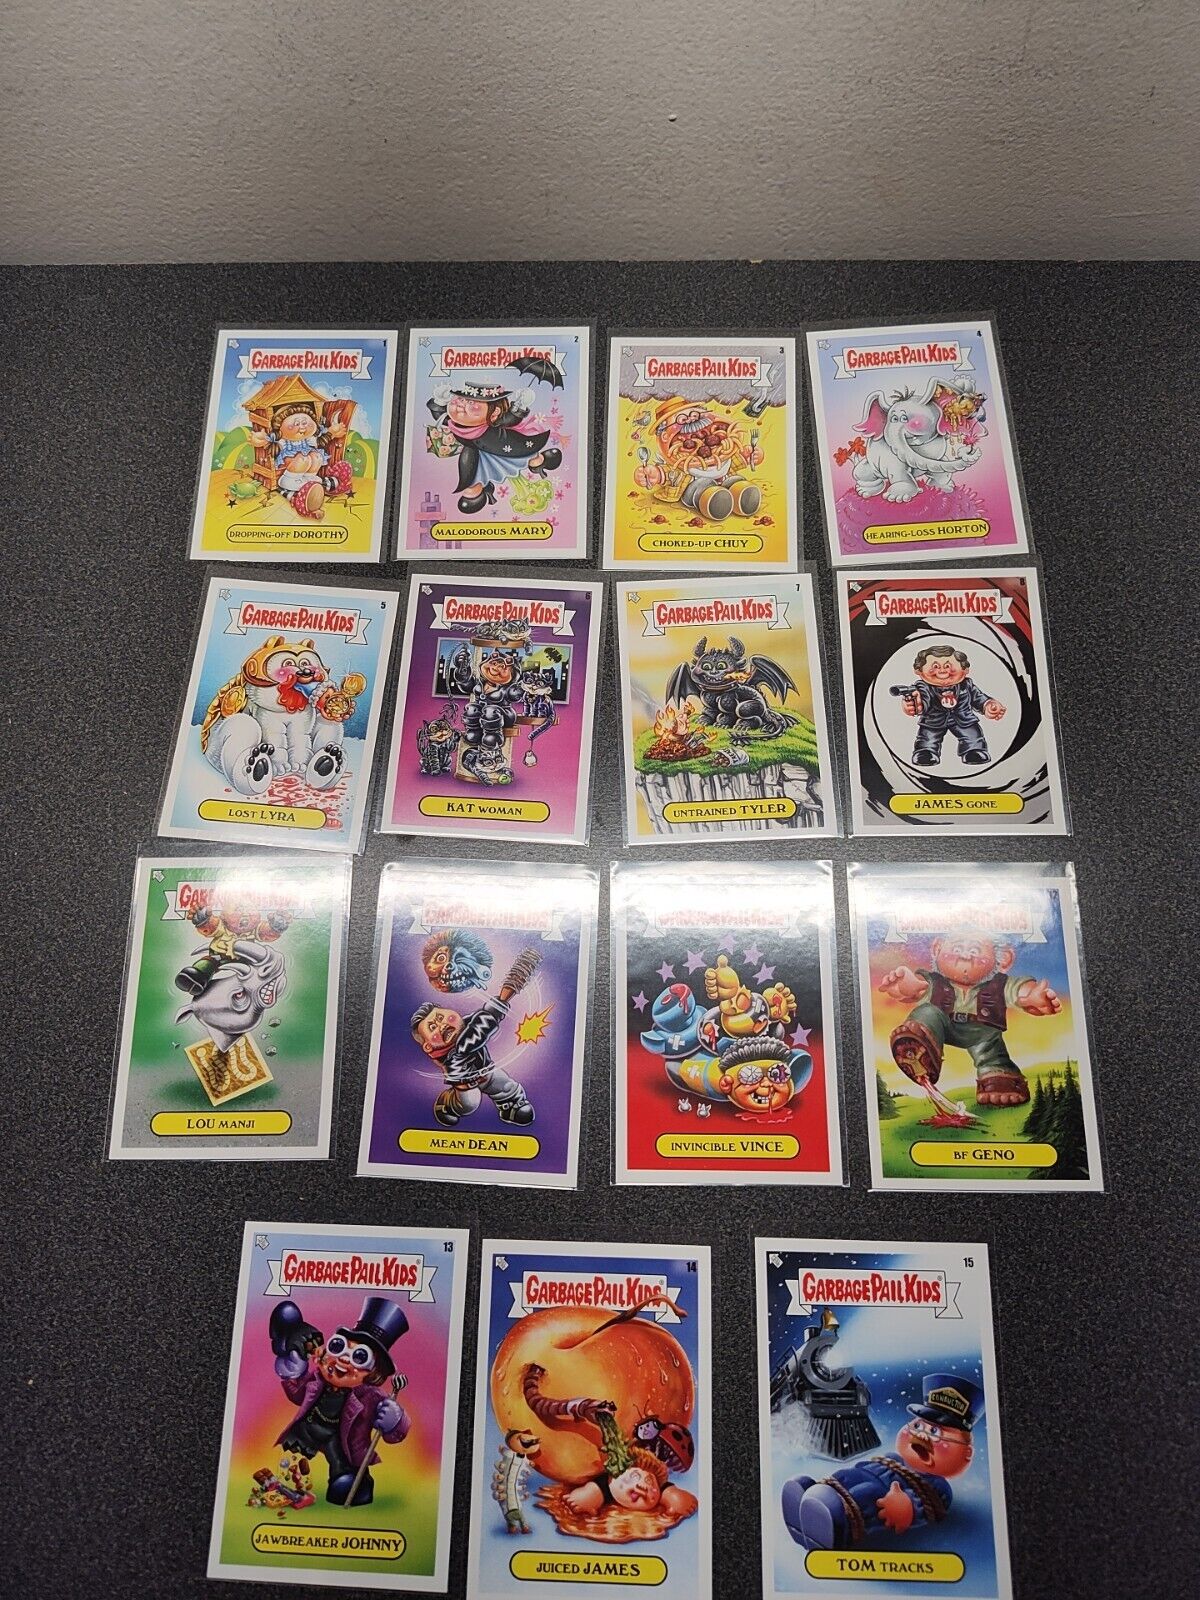 2022 Topps Garbage Pail Kids Book Worms GROSS ADAPTATIONS COMPLETE SET 1-15 GPK